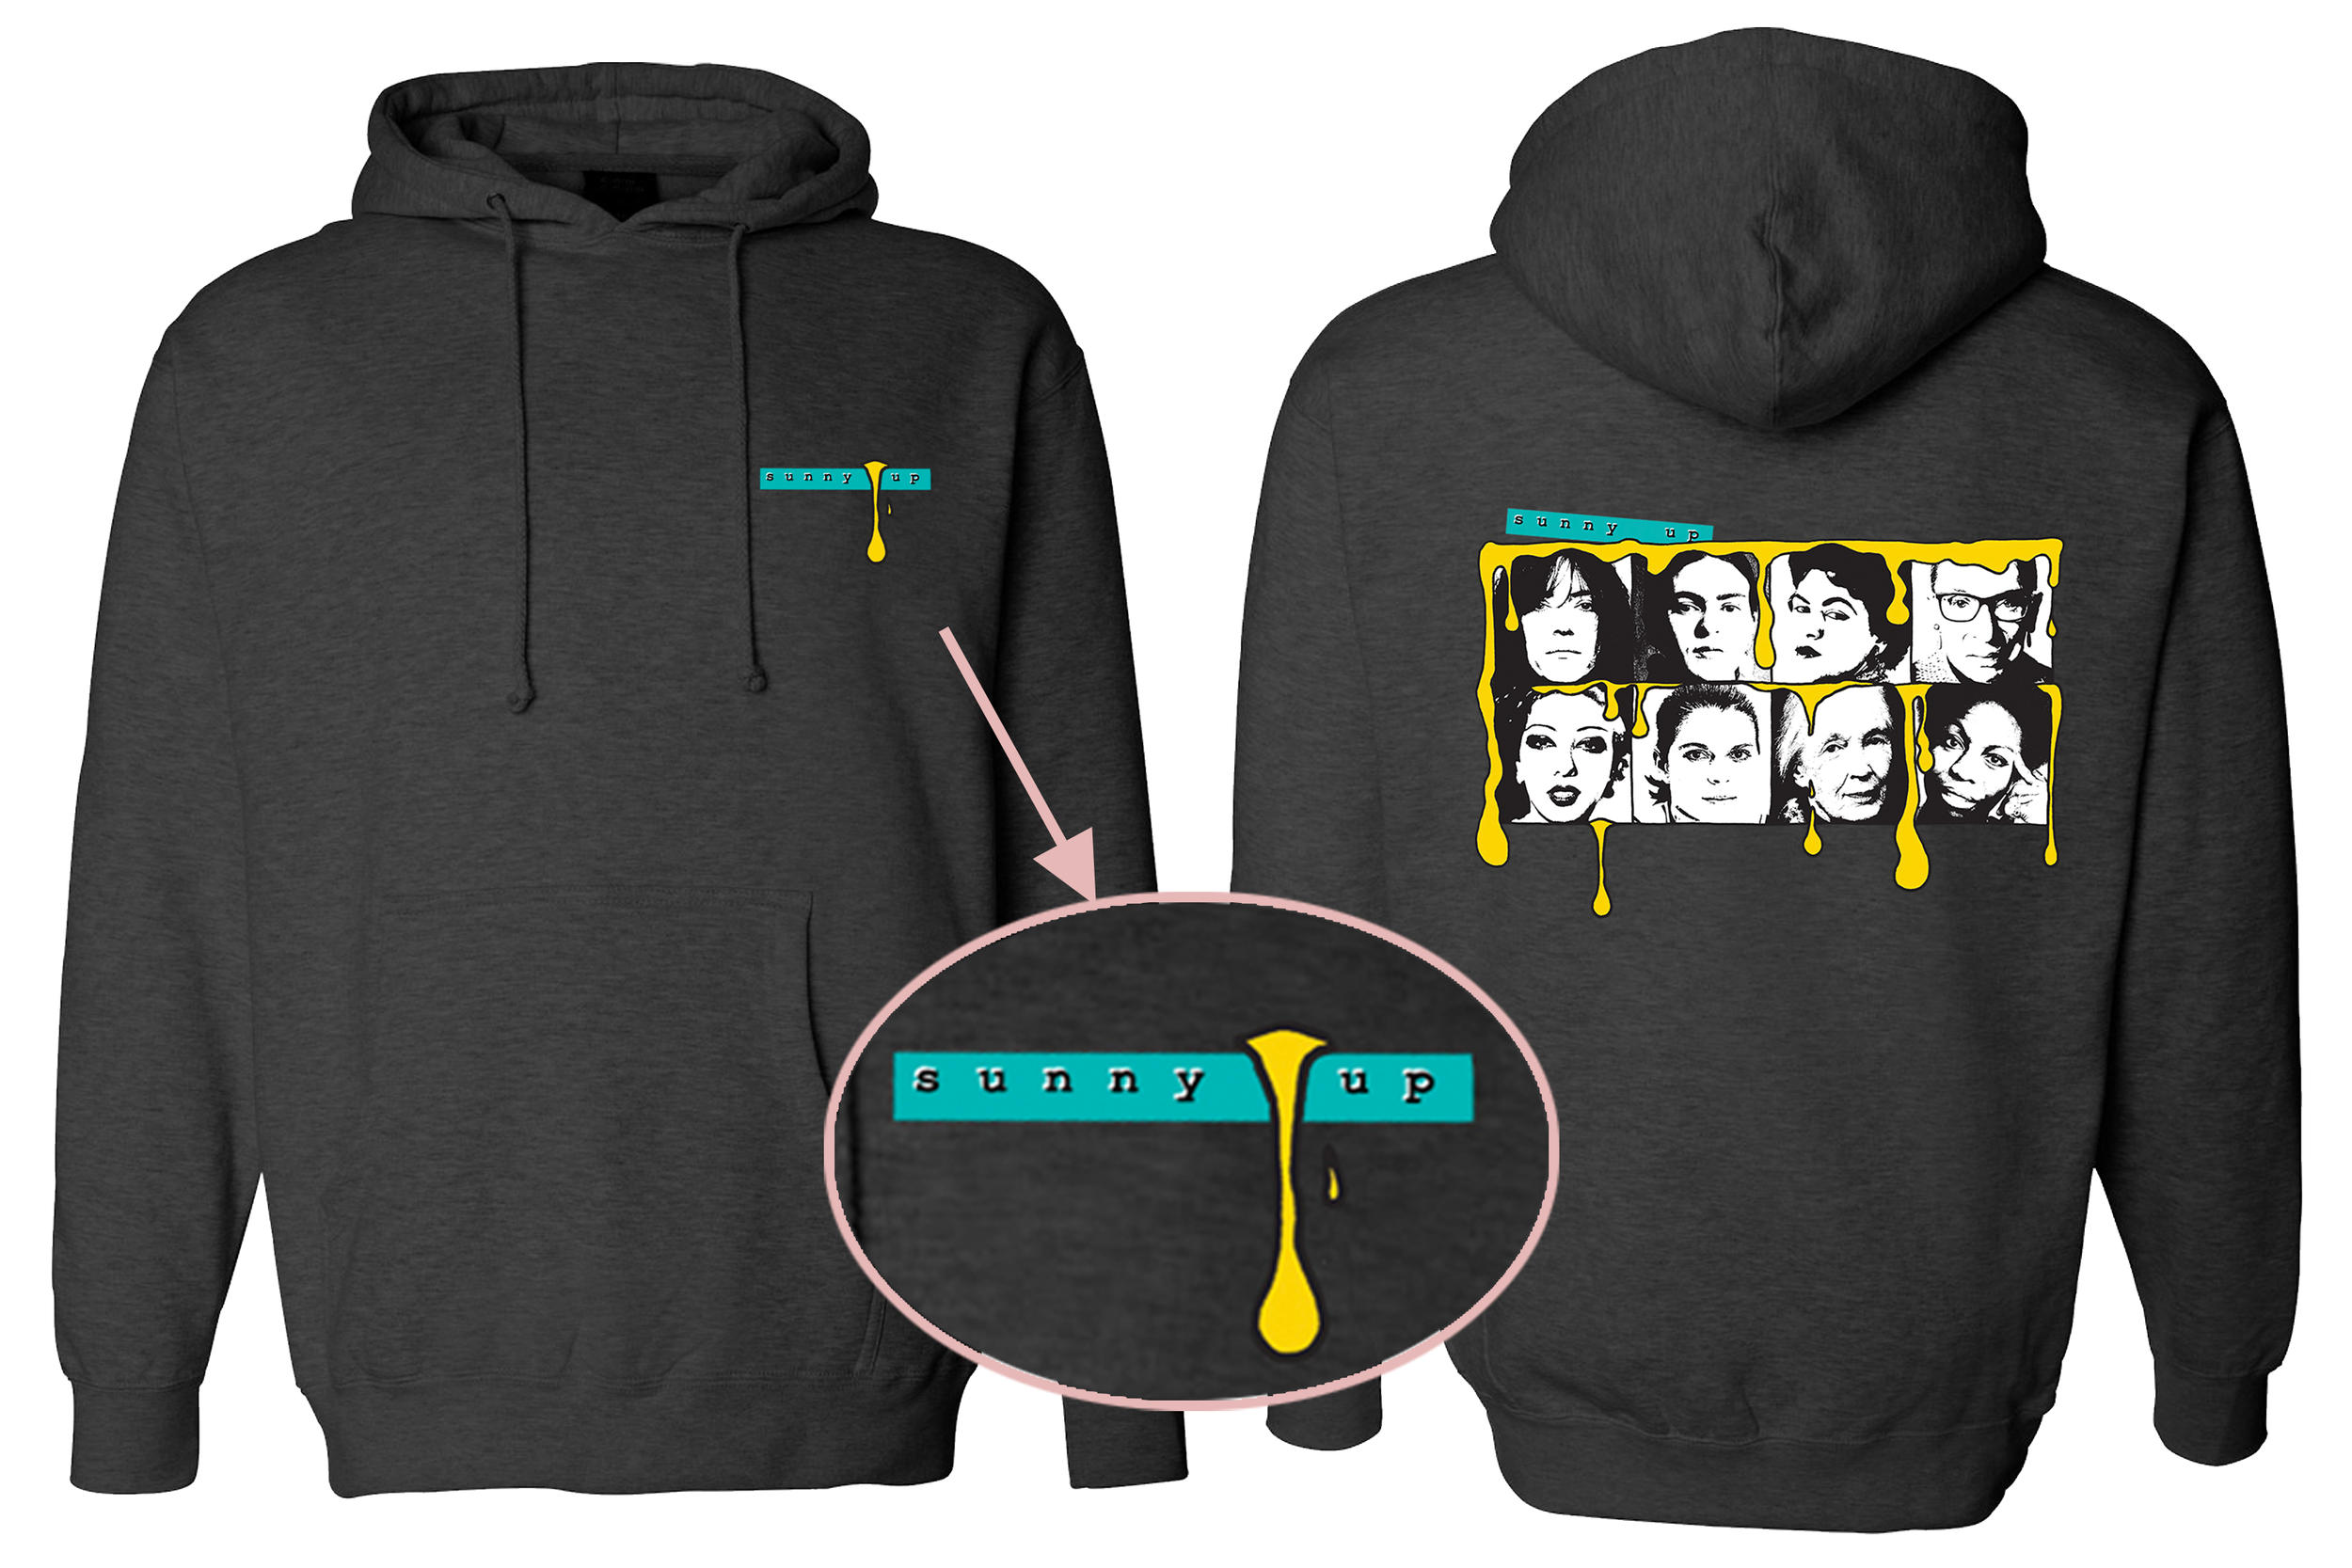 “Egg Drip” Independent Heavyweight Pullover Hoodie  - $60